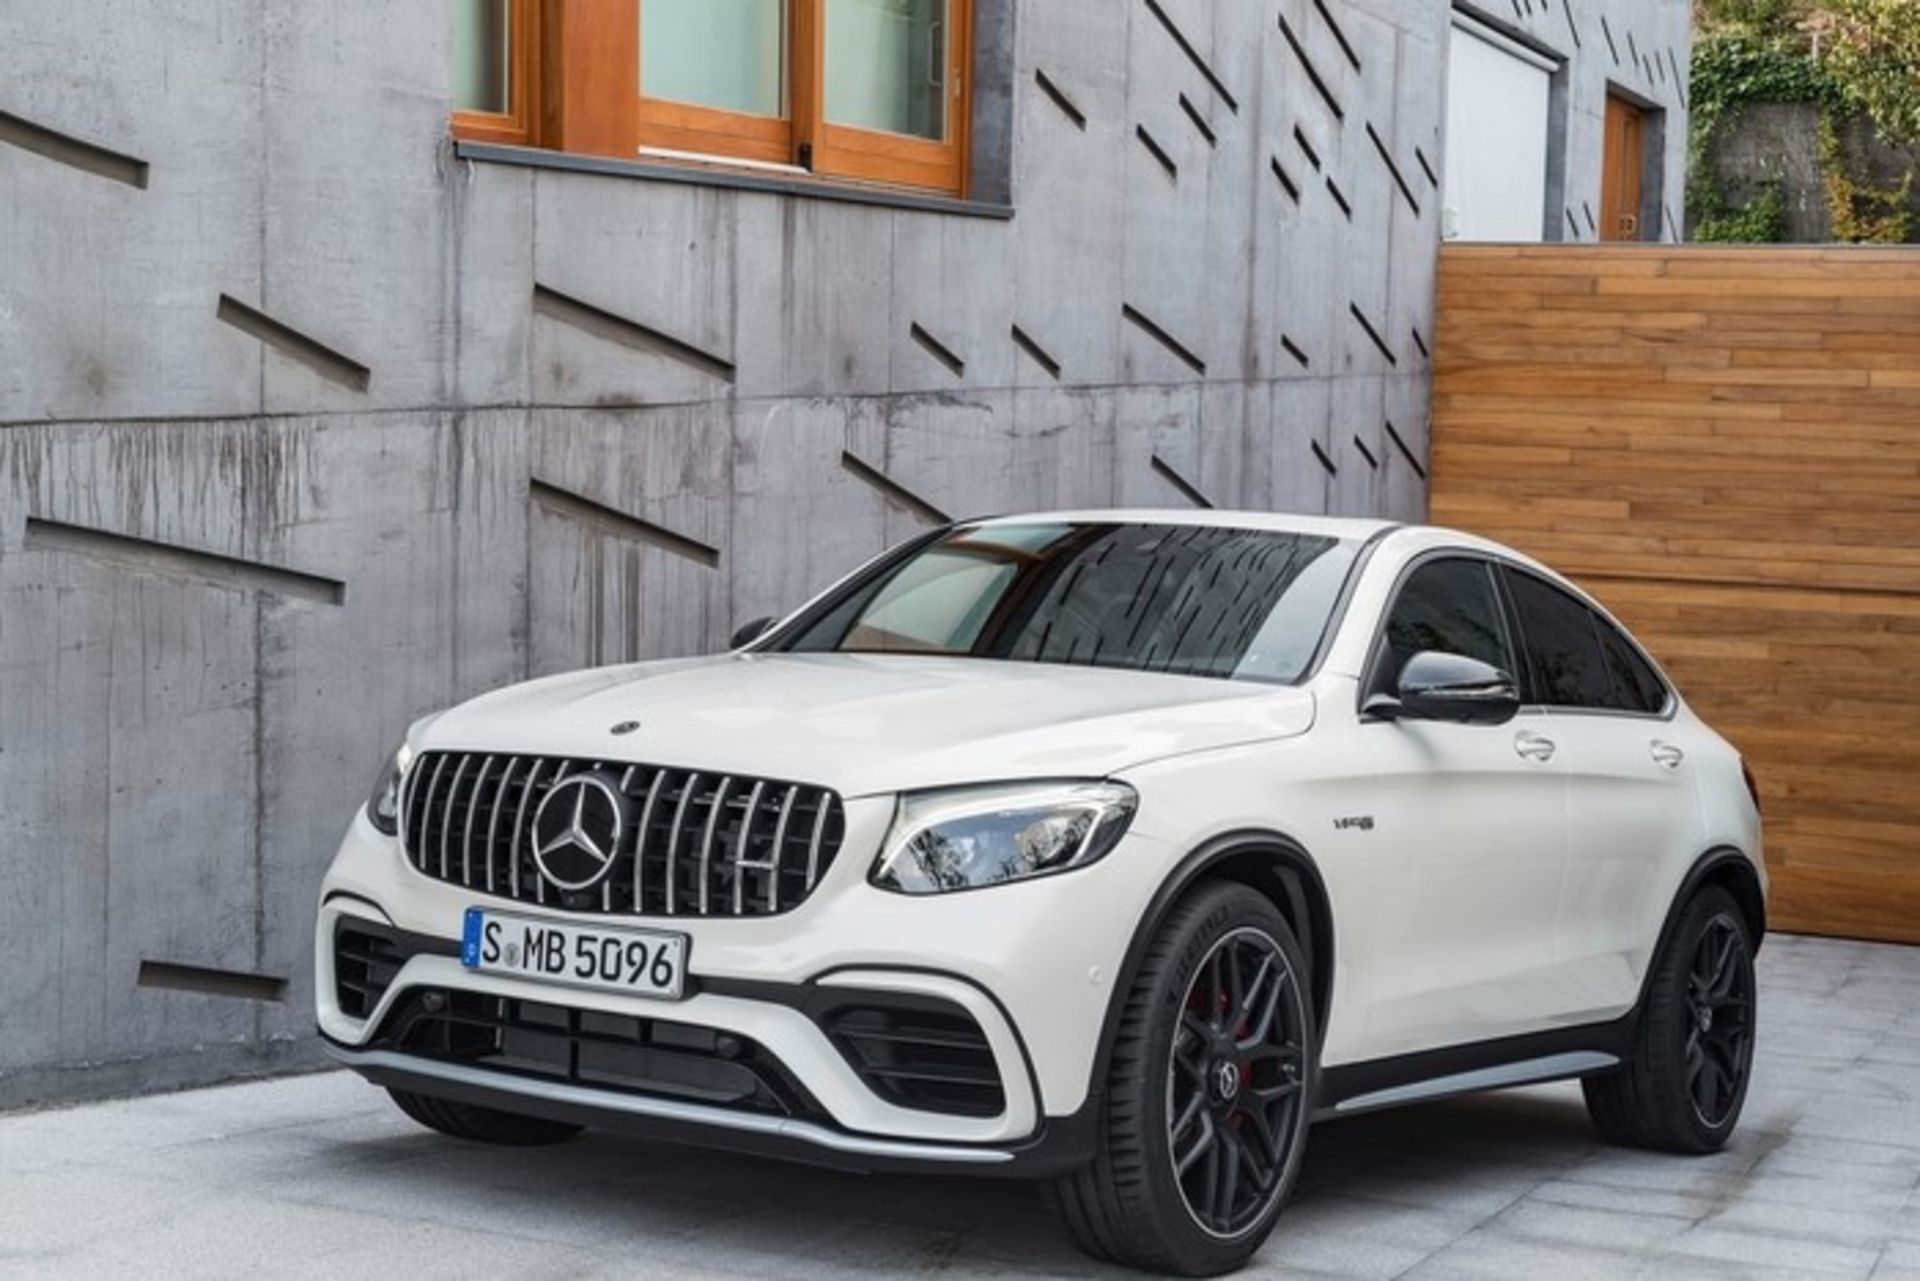 Mercedes benz AMG GLC63 S Coupe